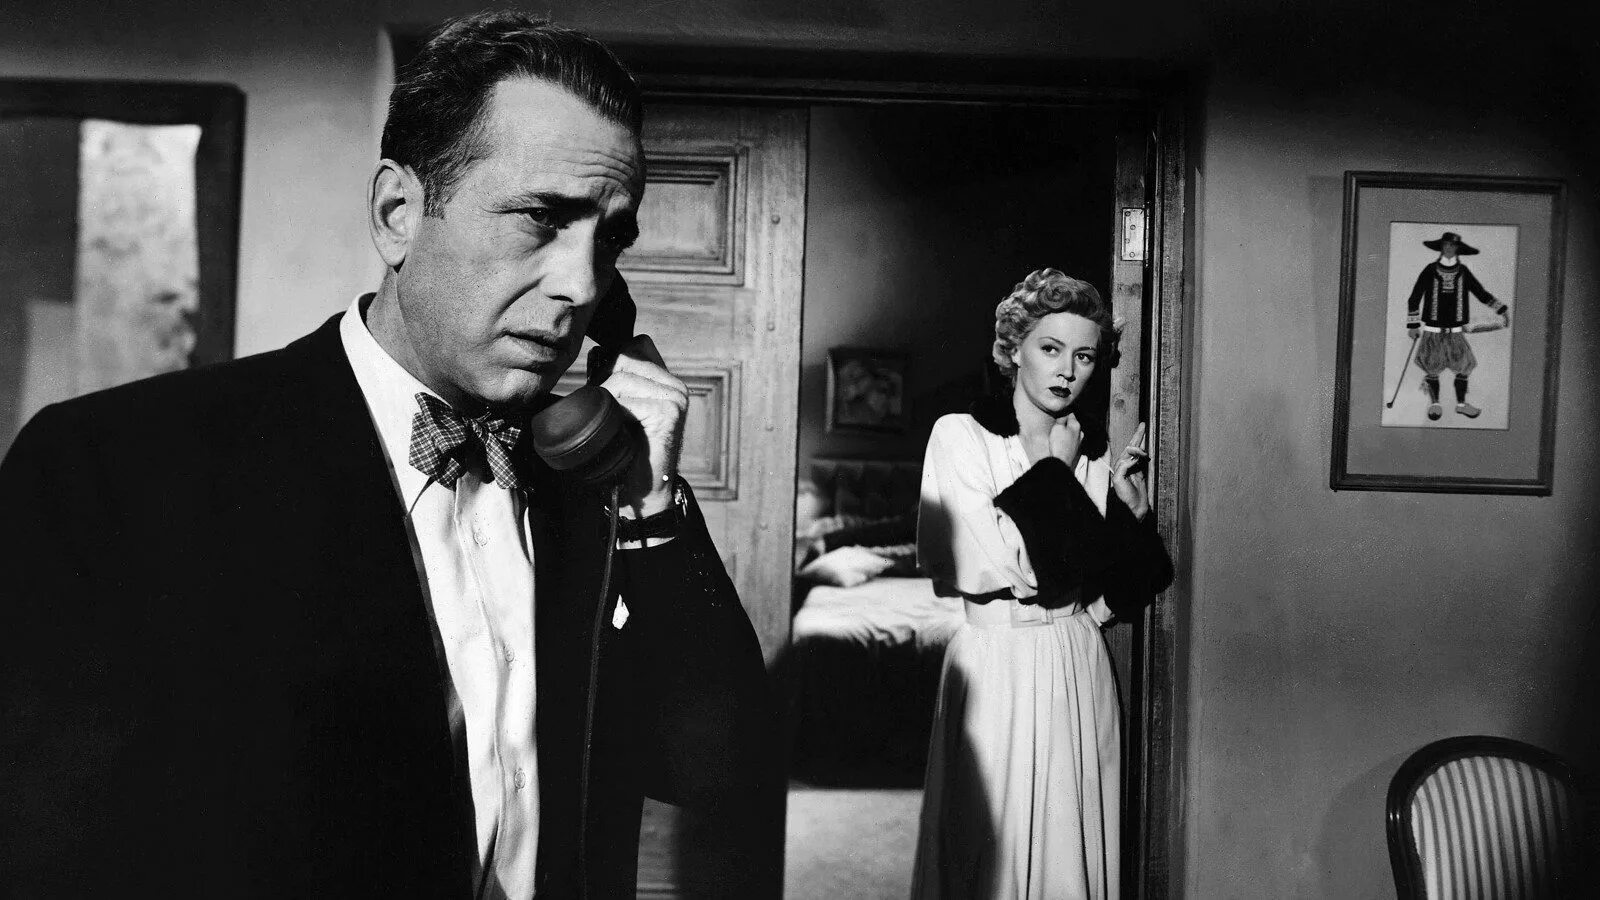 It s just a little. Хамфри Богарт. В Укромном месте in a Lonely place, 1950. Нуар Хичкок.